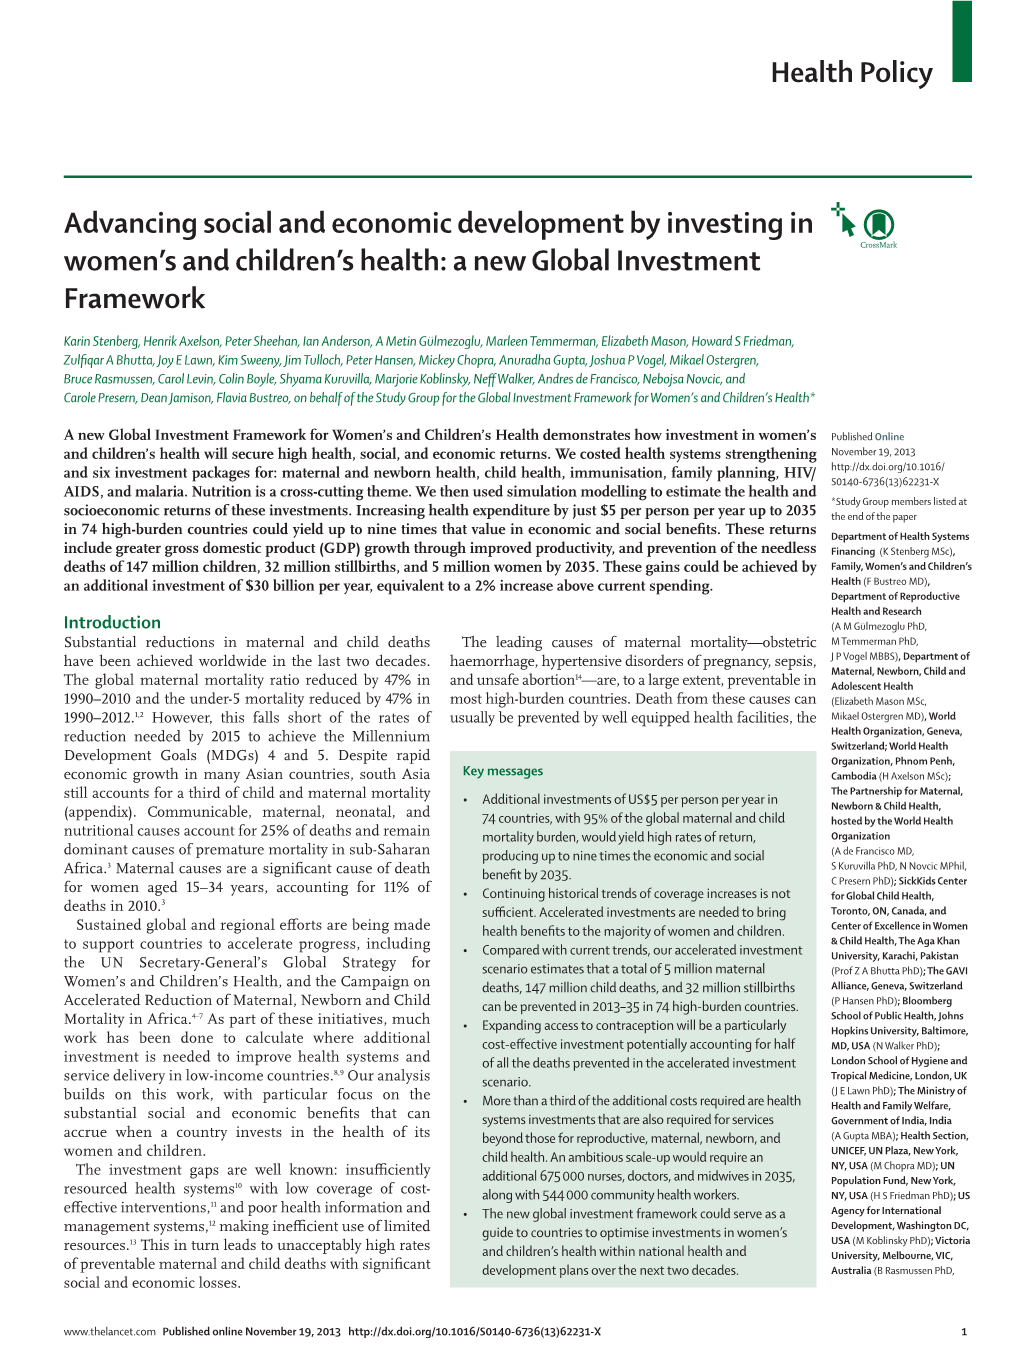 Health Policy Advancing Social and Economic Development by Investing